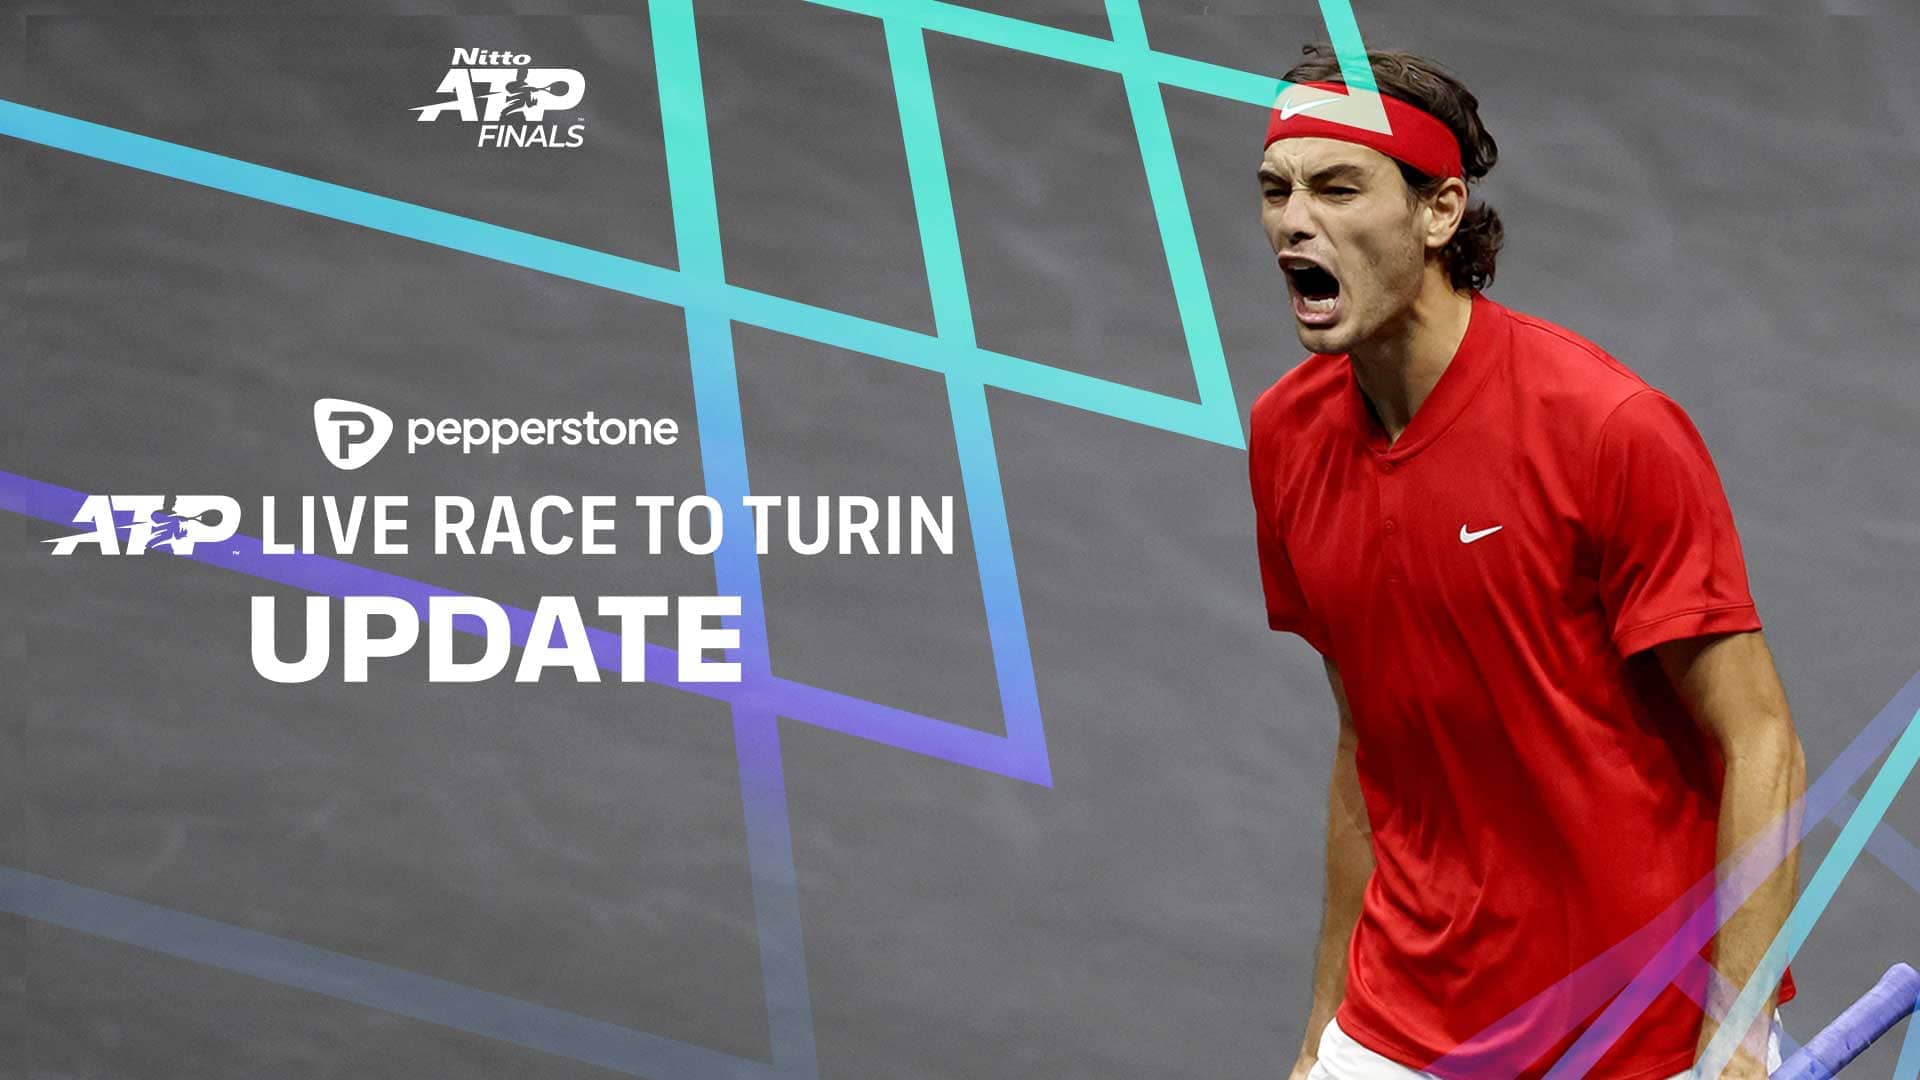 Fritz andamp; Hurkacz Aiming To Make Moves As Turin Battle Heats Up News Article Nitto ATP Finals Tennis